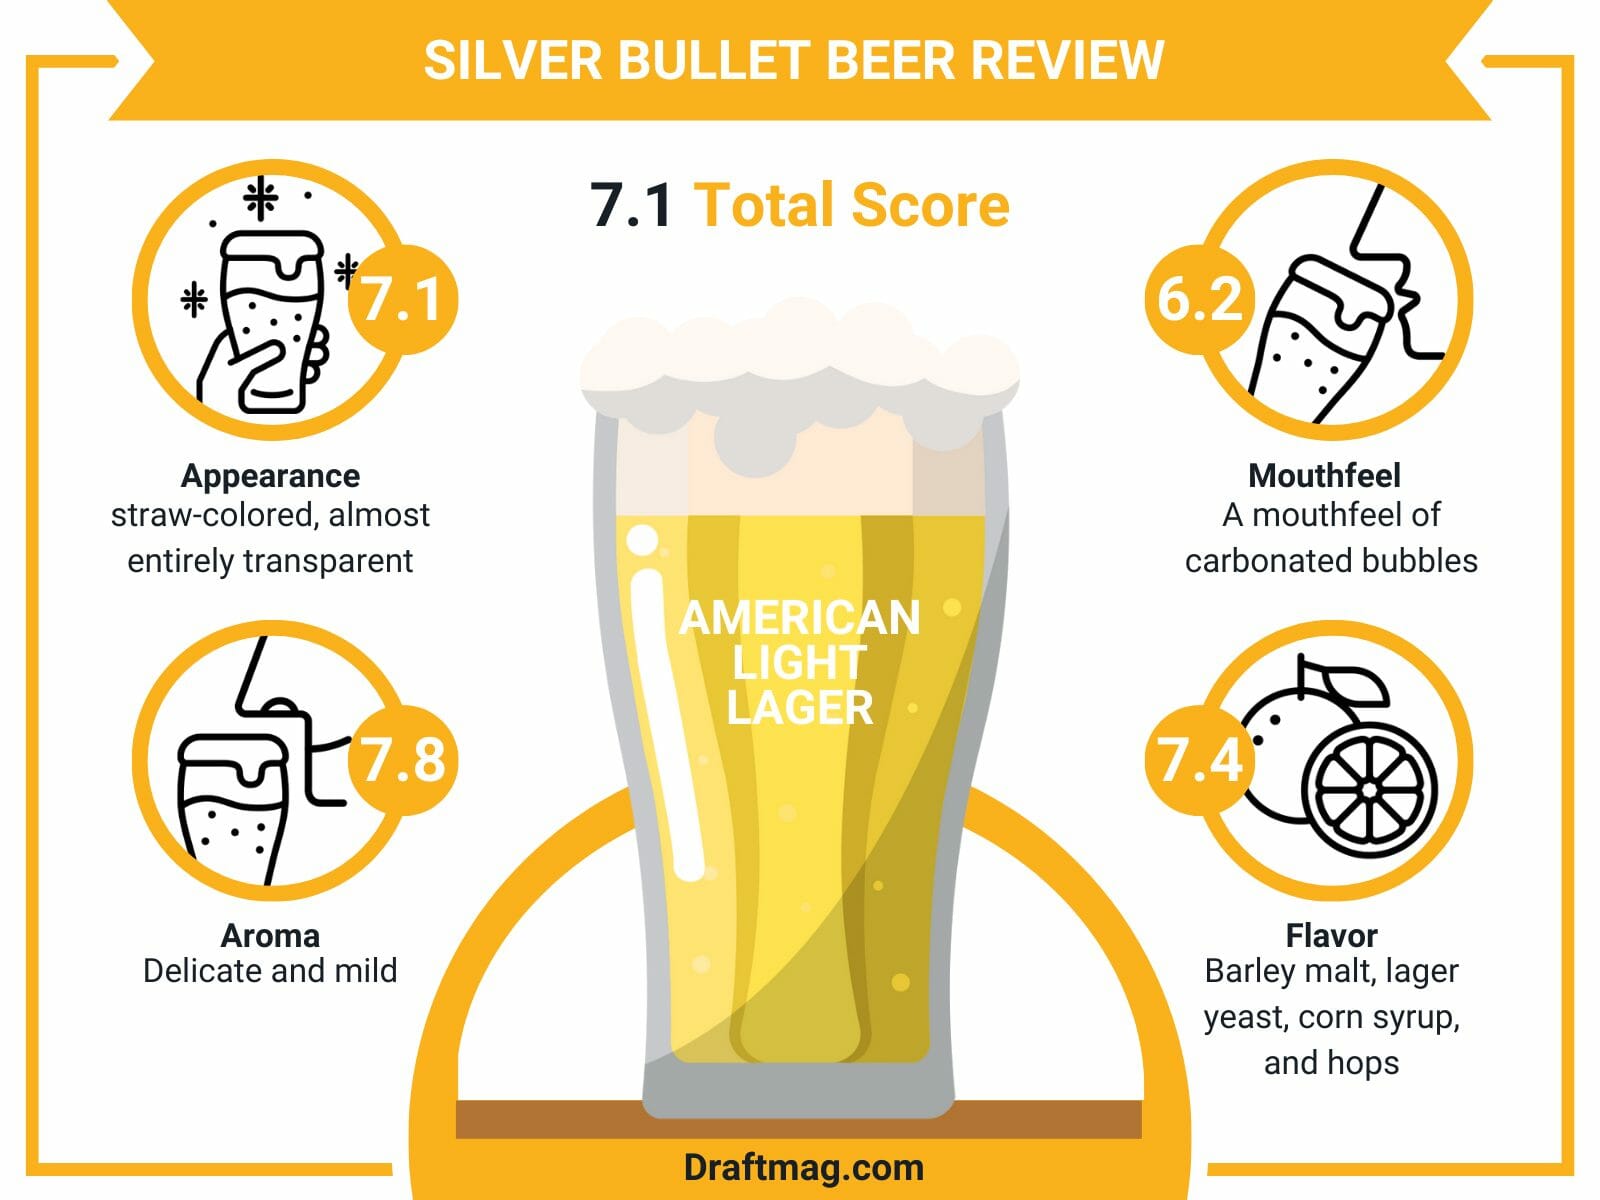 Silver bullet beer review infographic